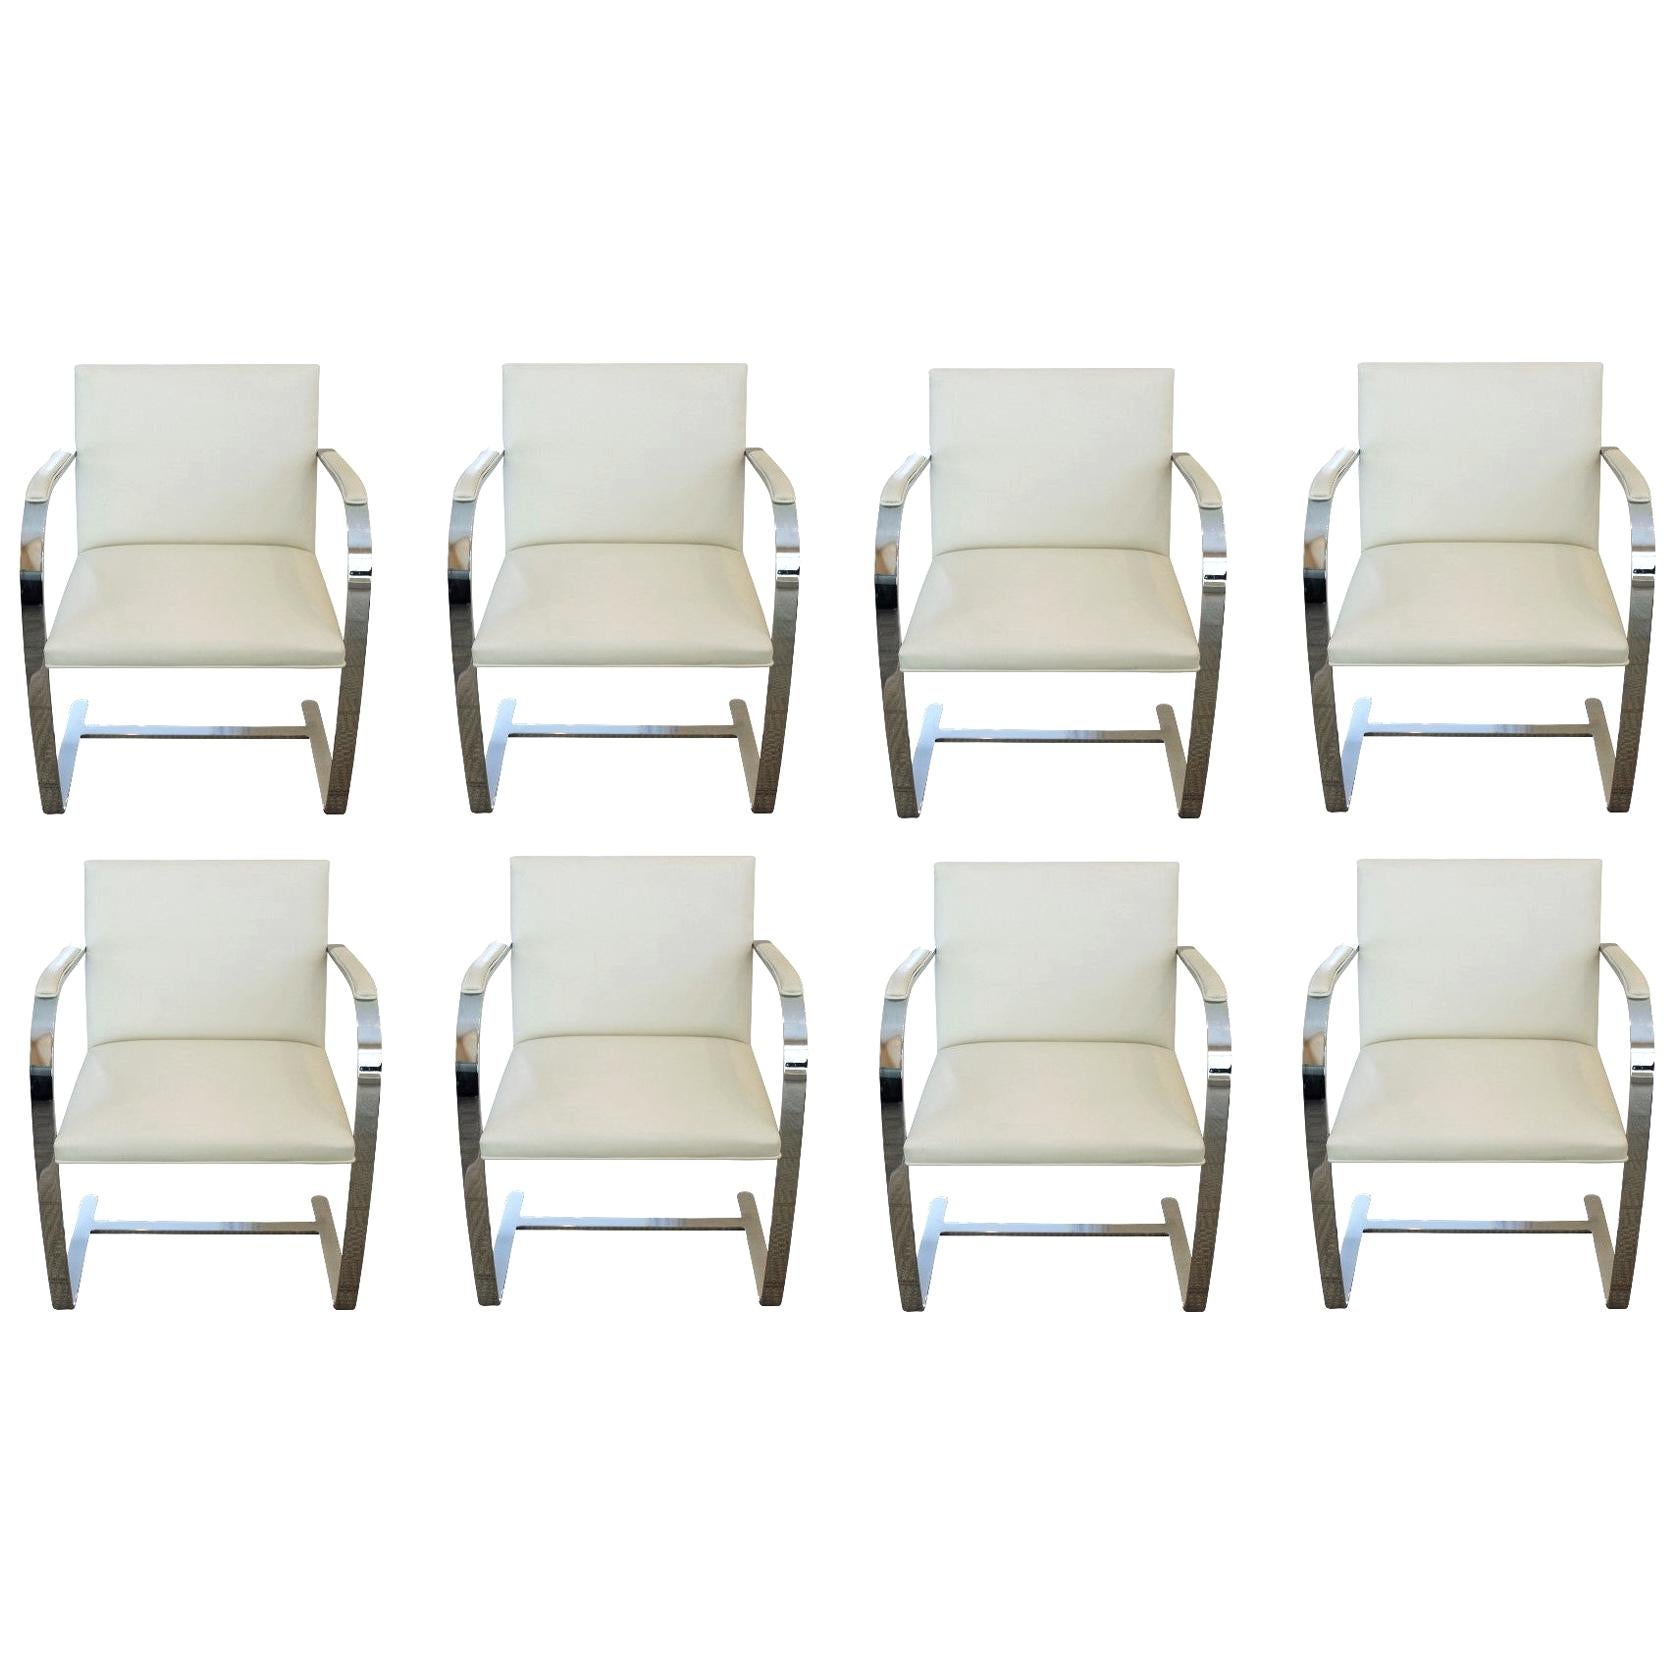 8 Knoll Chrome and White Leather Modern Chairs